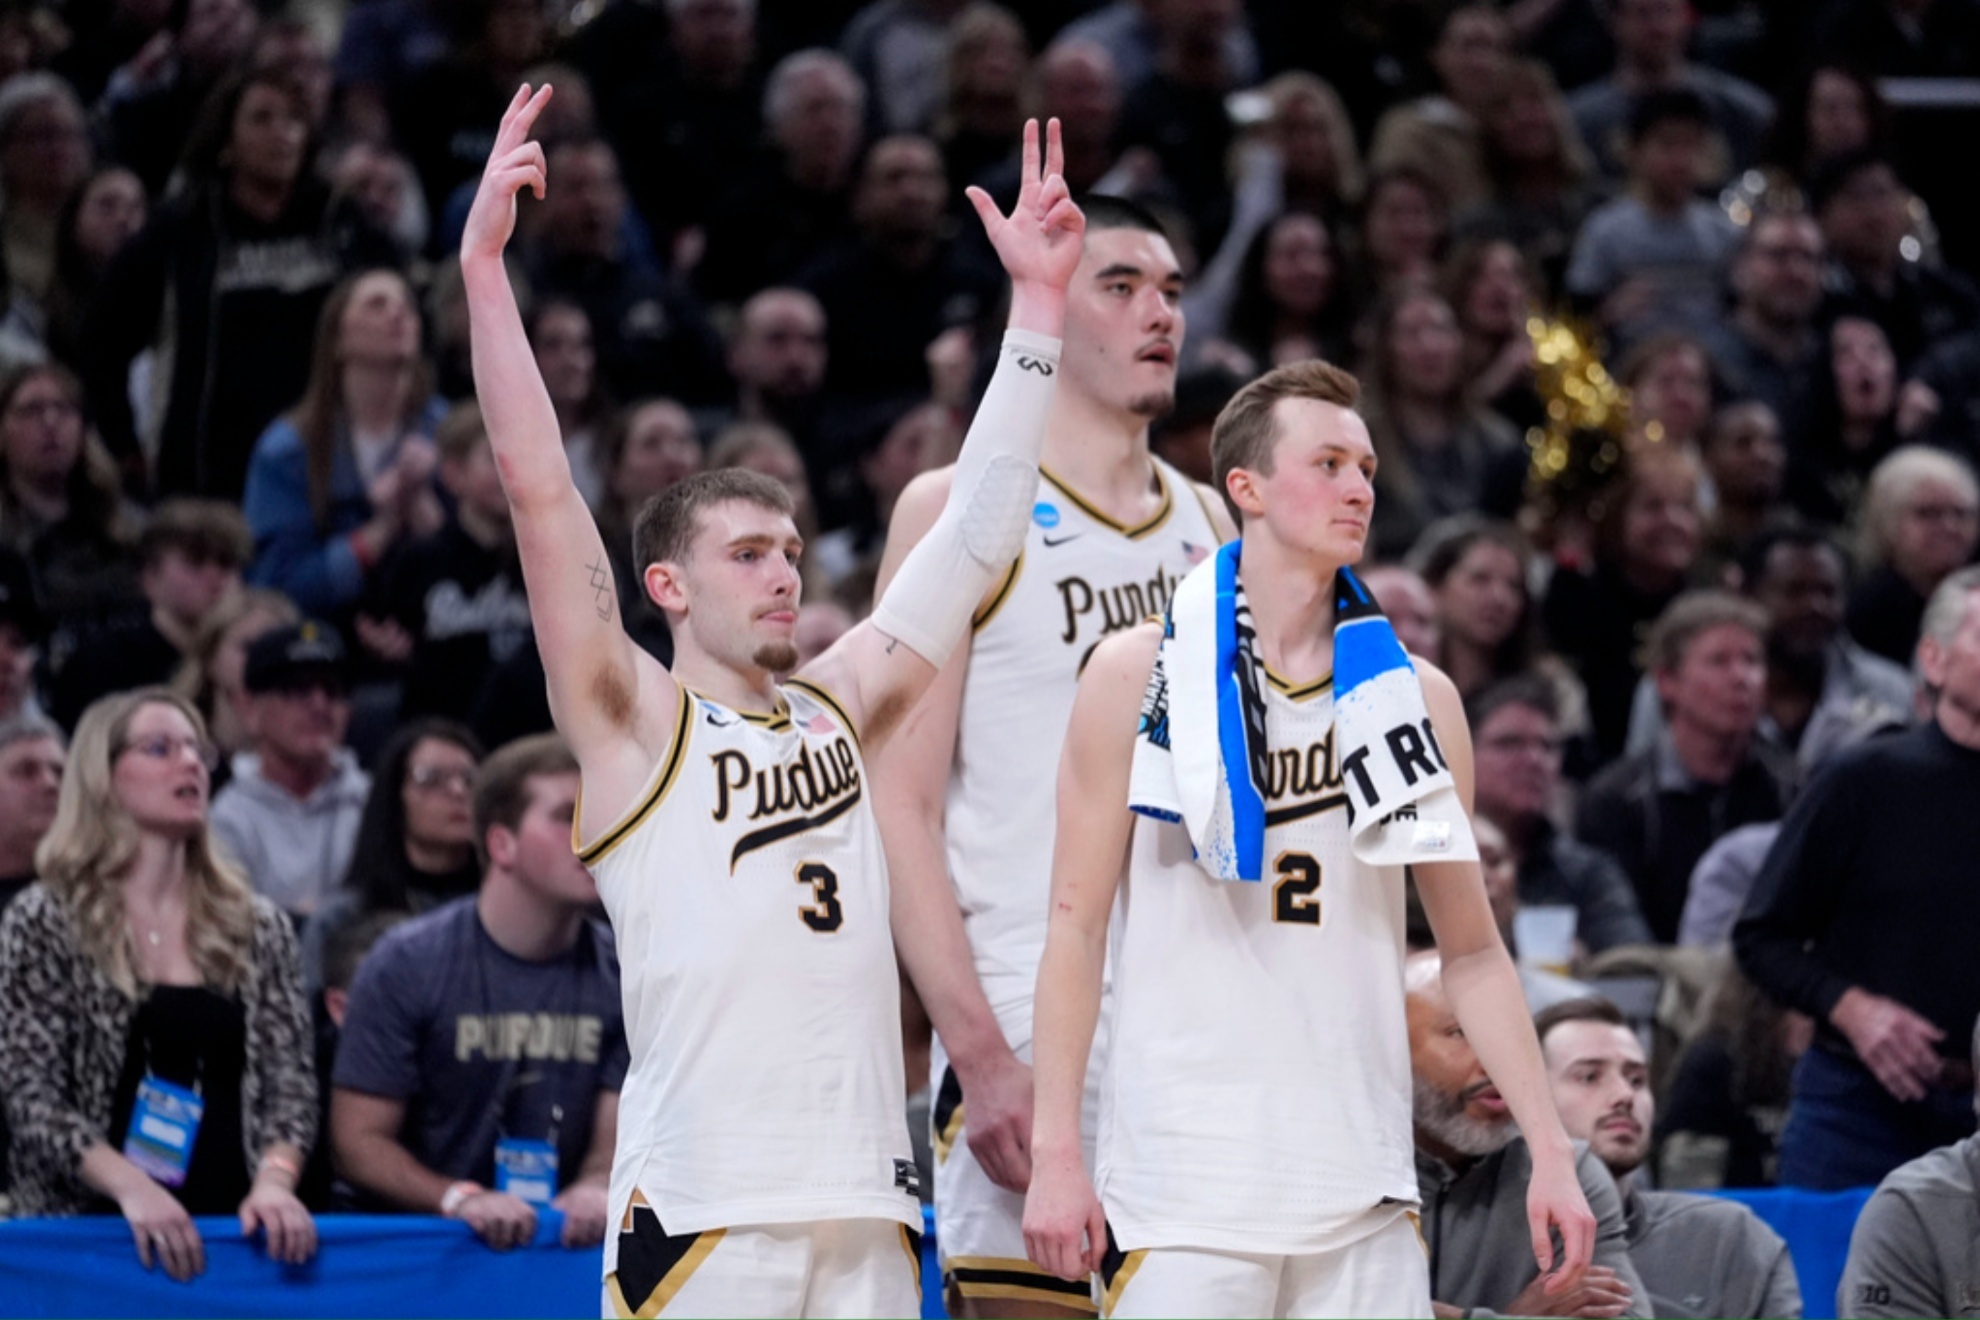 The Purdue Boilmakers will face off against NC State in the NCAA Tournaments Final Four